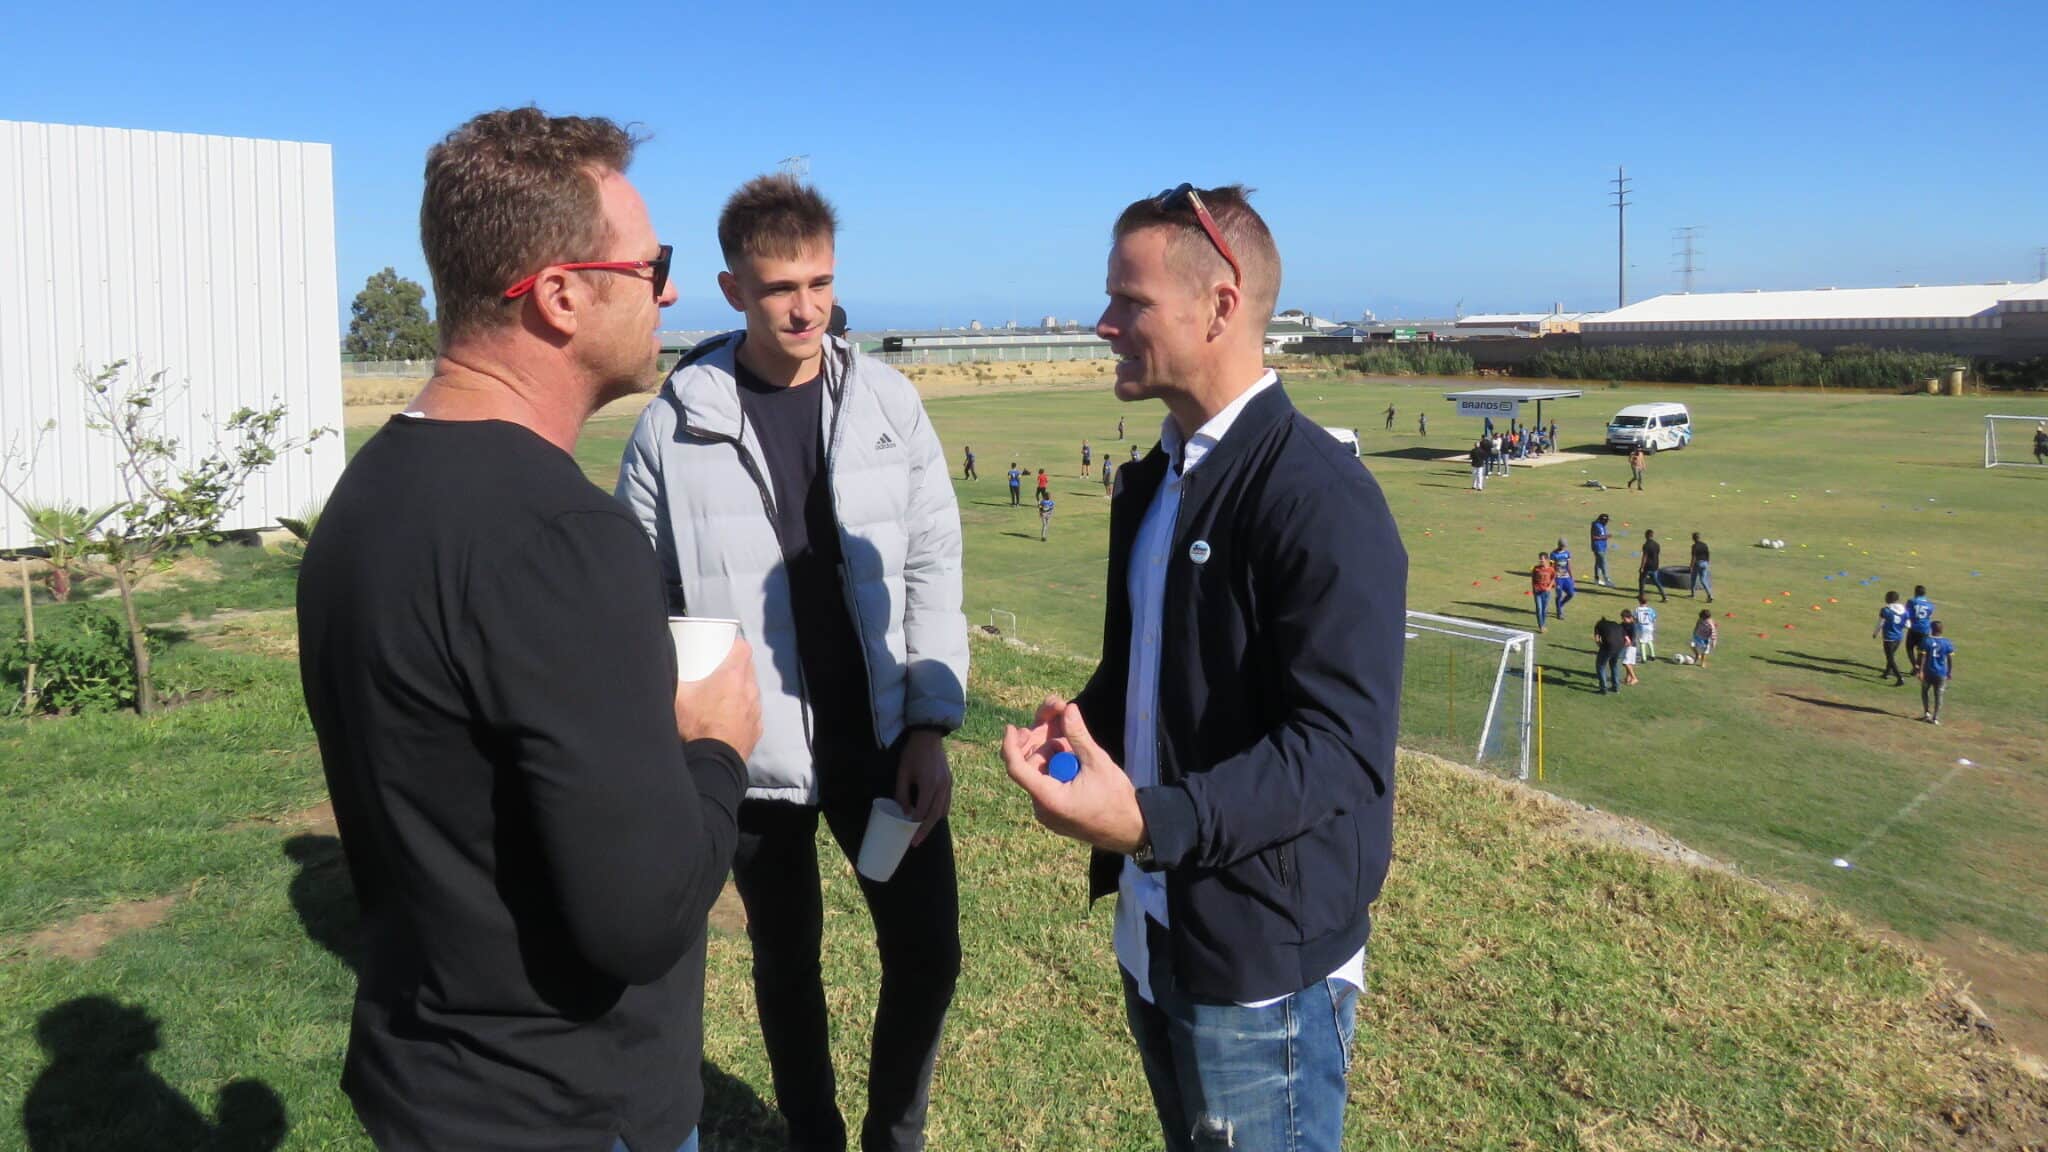 Three men having a chat in front of a soccer pitch during the YB Arena opening.